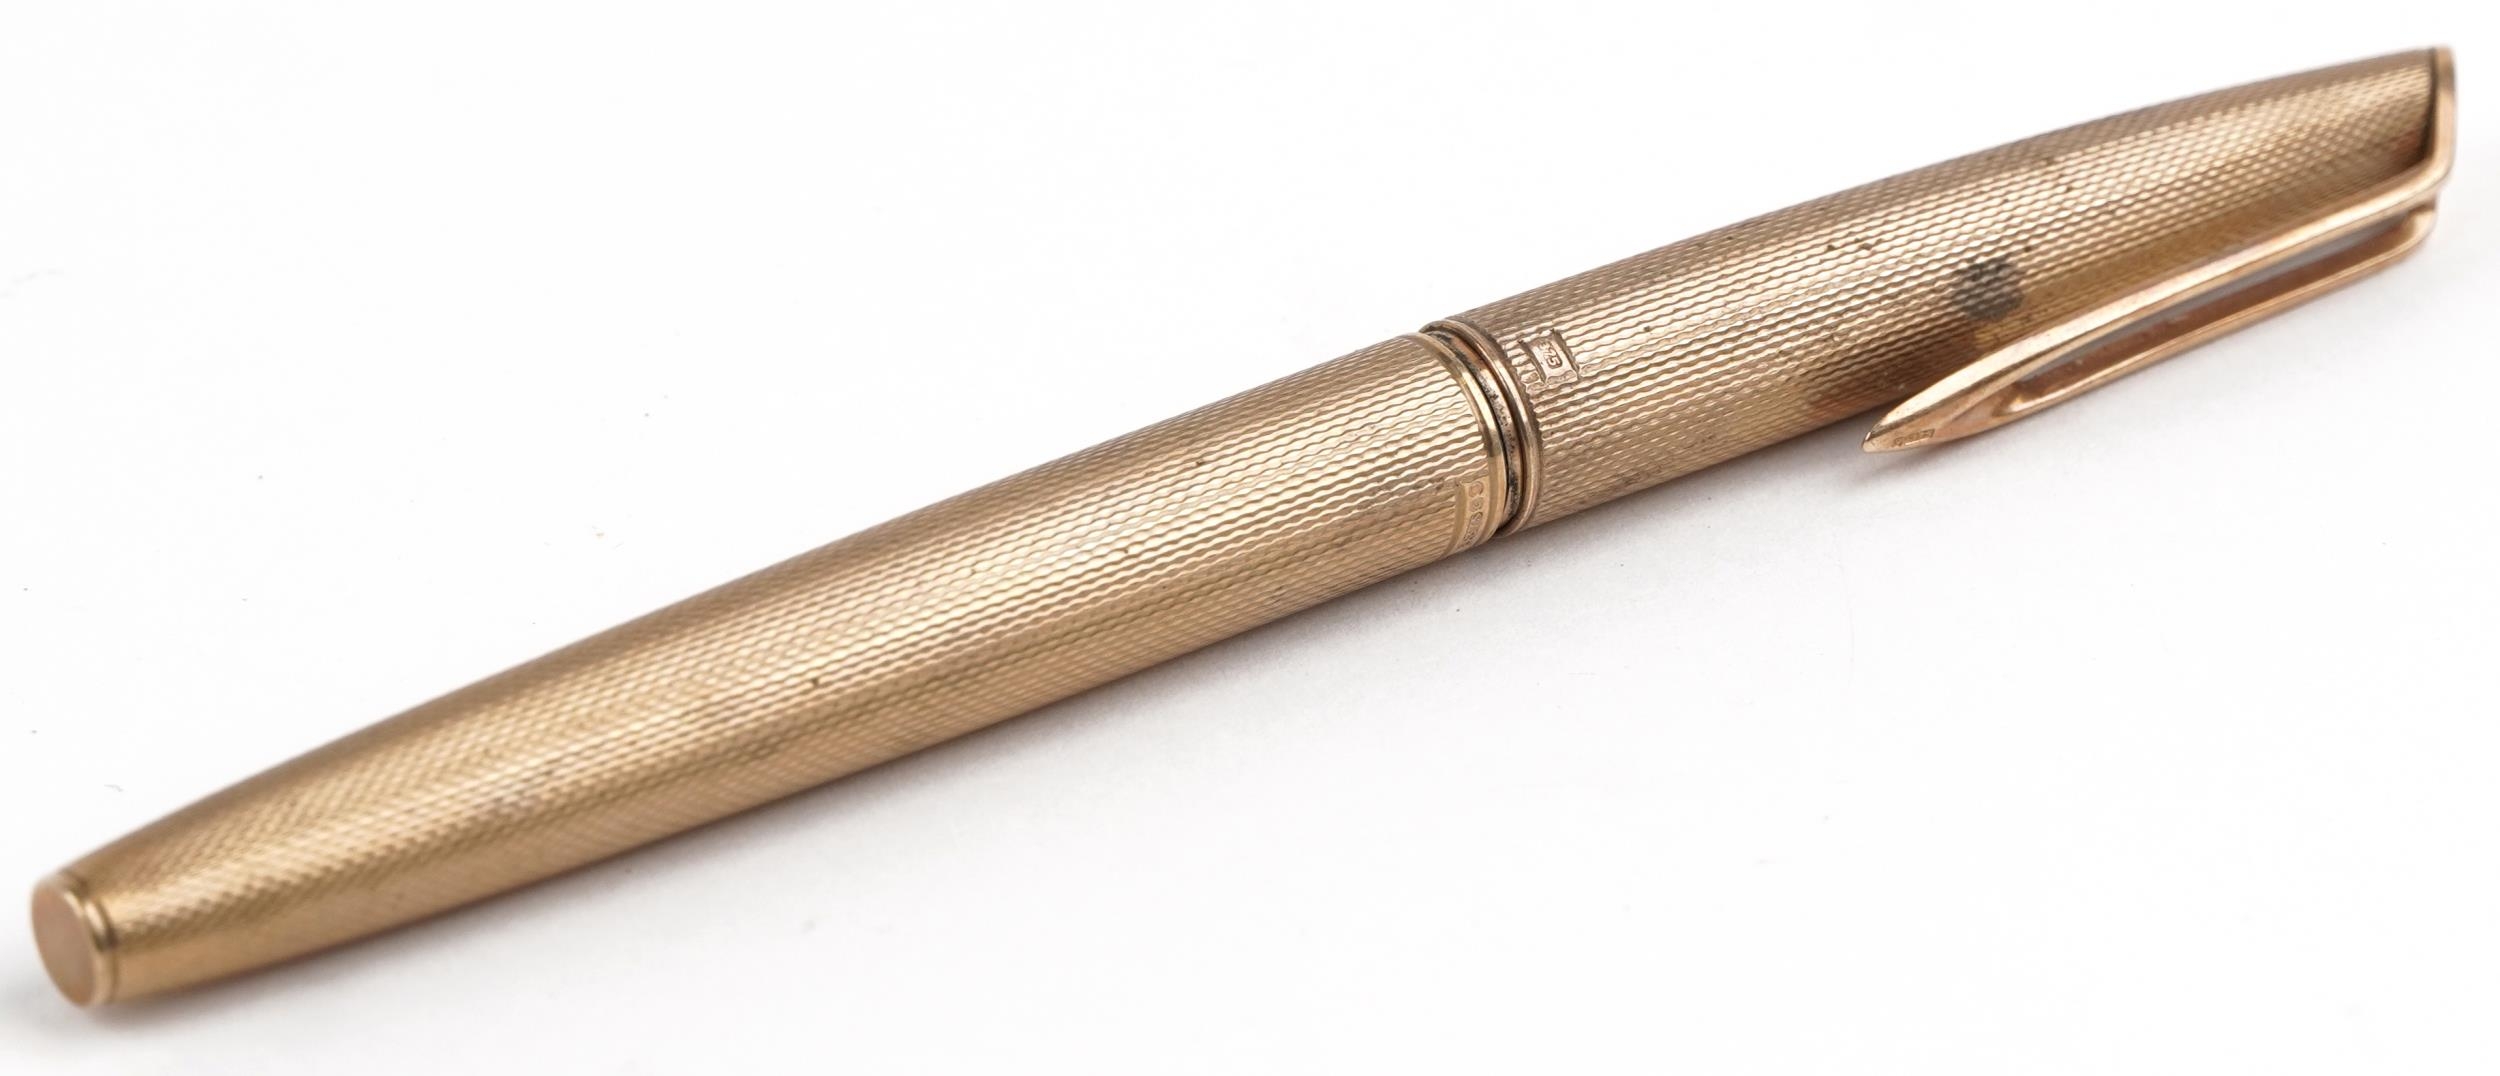 9ct gold cased fountain pen with 14ct gold nib housed in a Watermans fitted case, 23.5g - Image 3 of 5